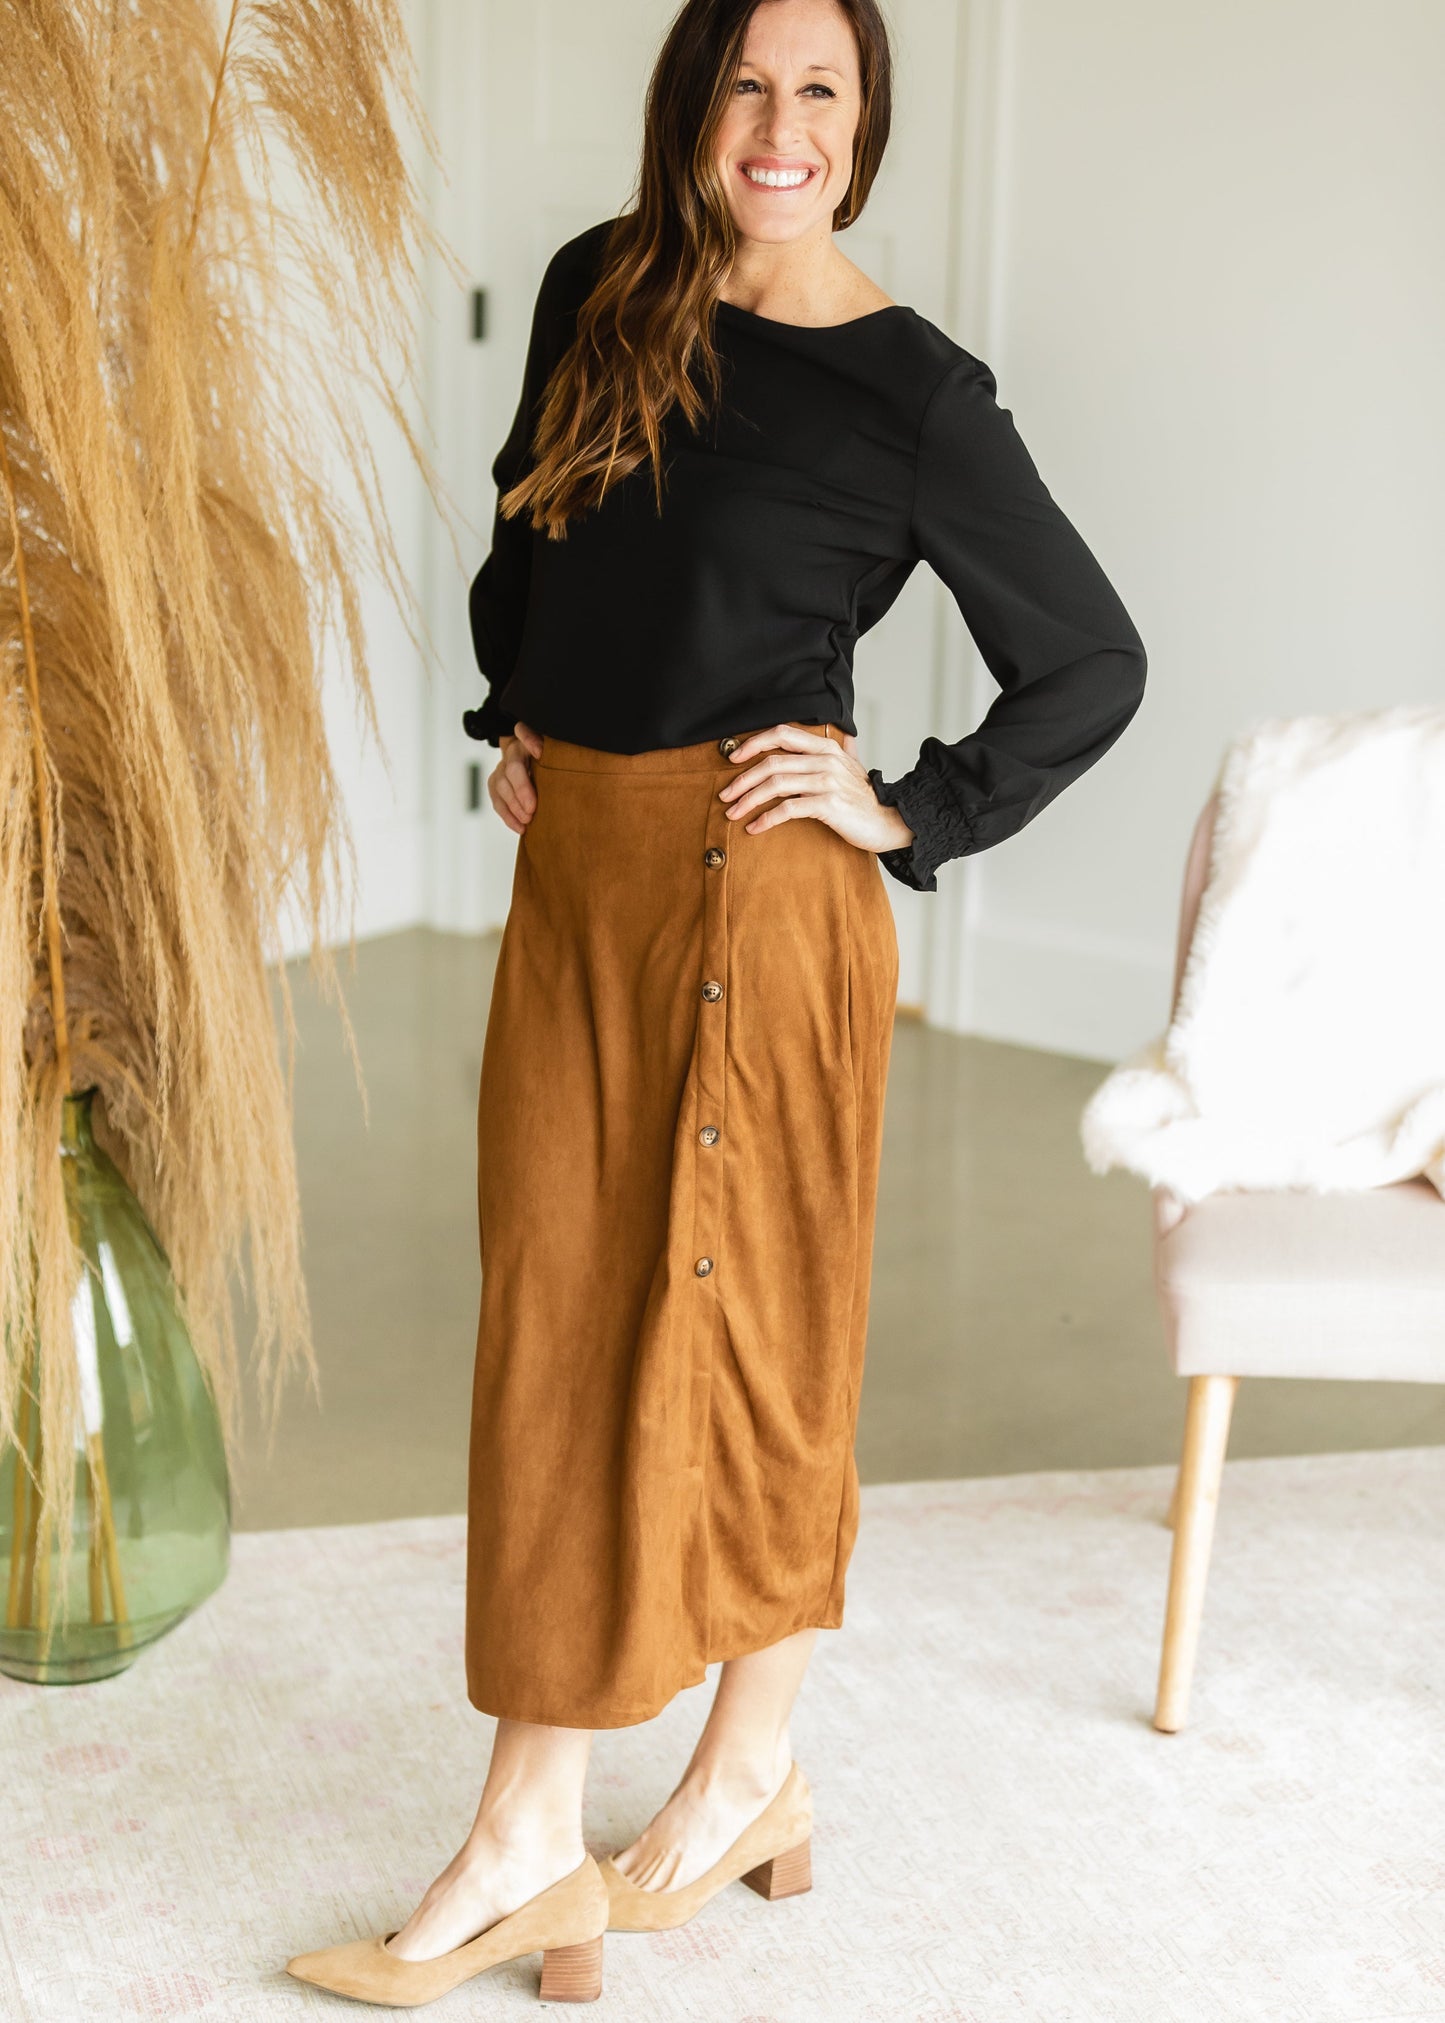 Camel Suede Button Up Midi Skirt - FINAL SALE Skirts